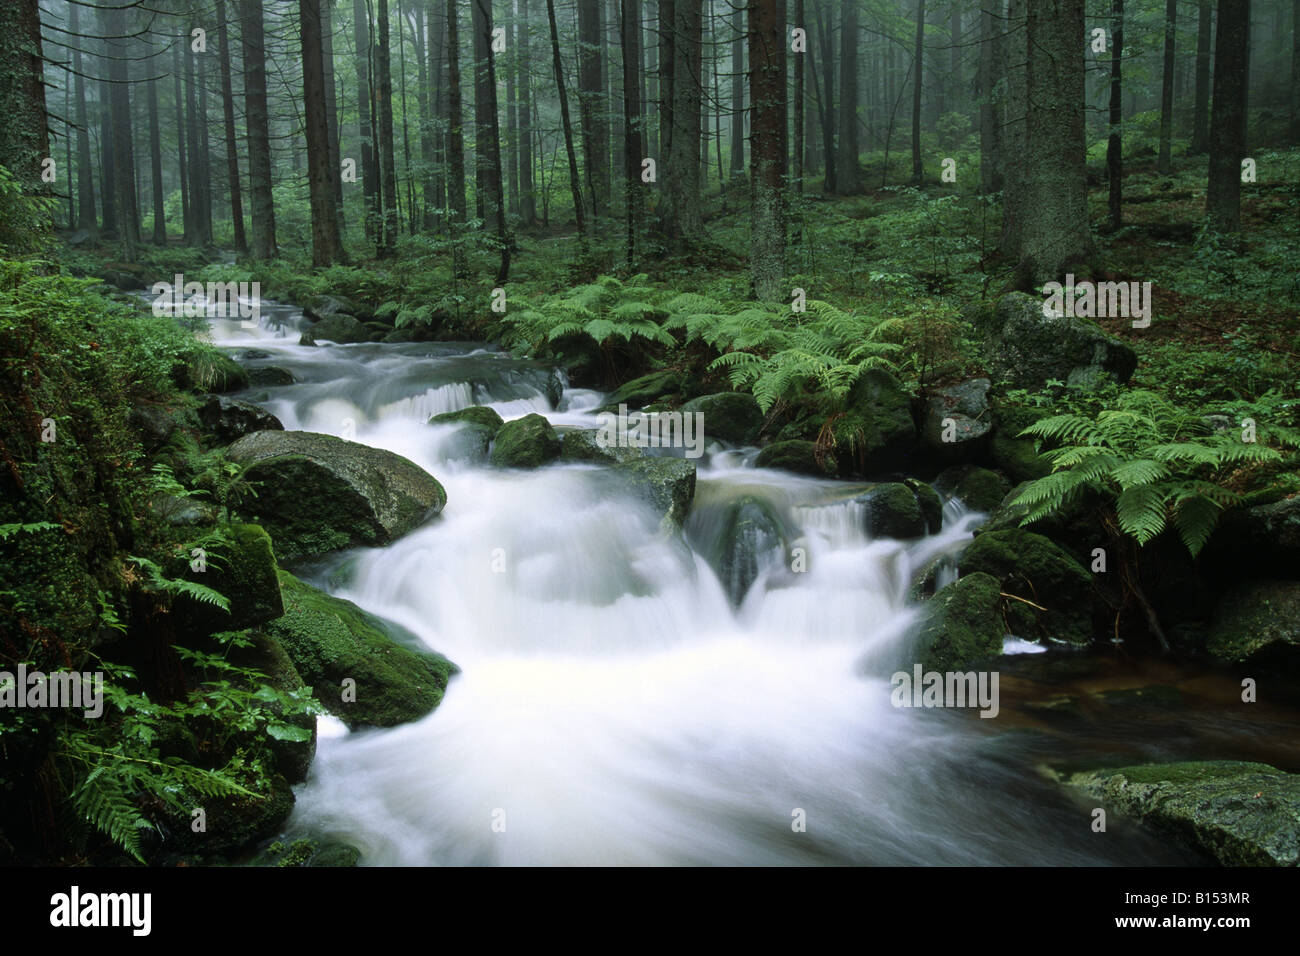 Forest brook in the National Park Bayerischer Wald Bavarian Forest Bavaria Germany Stock Photo